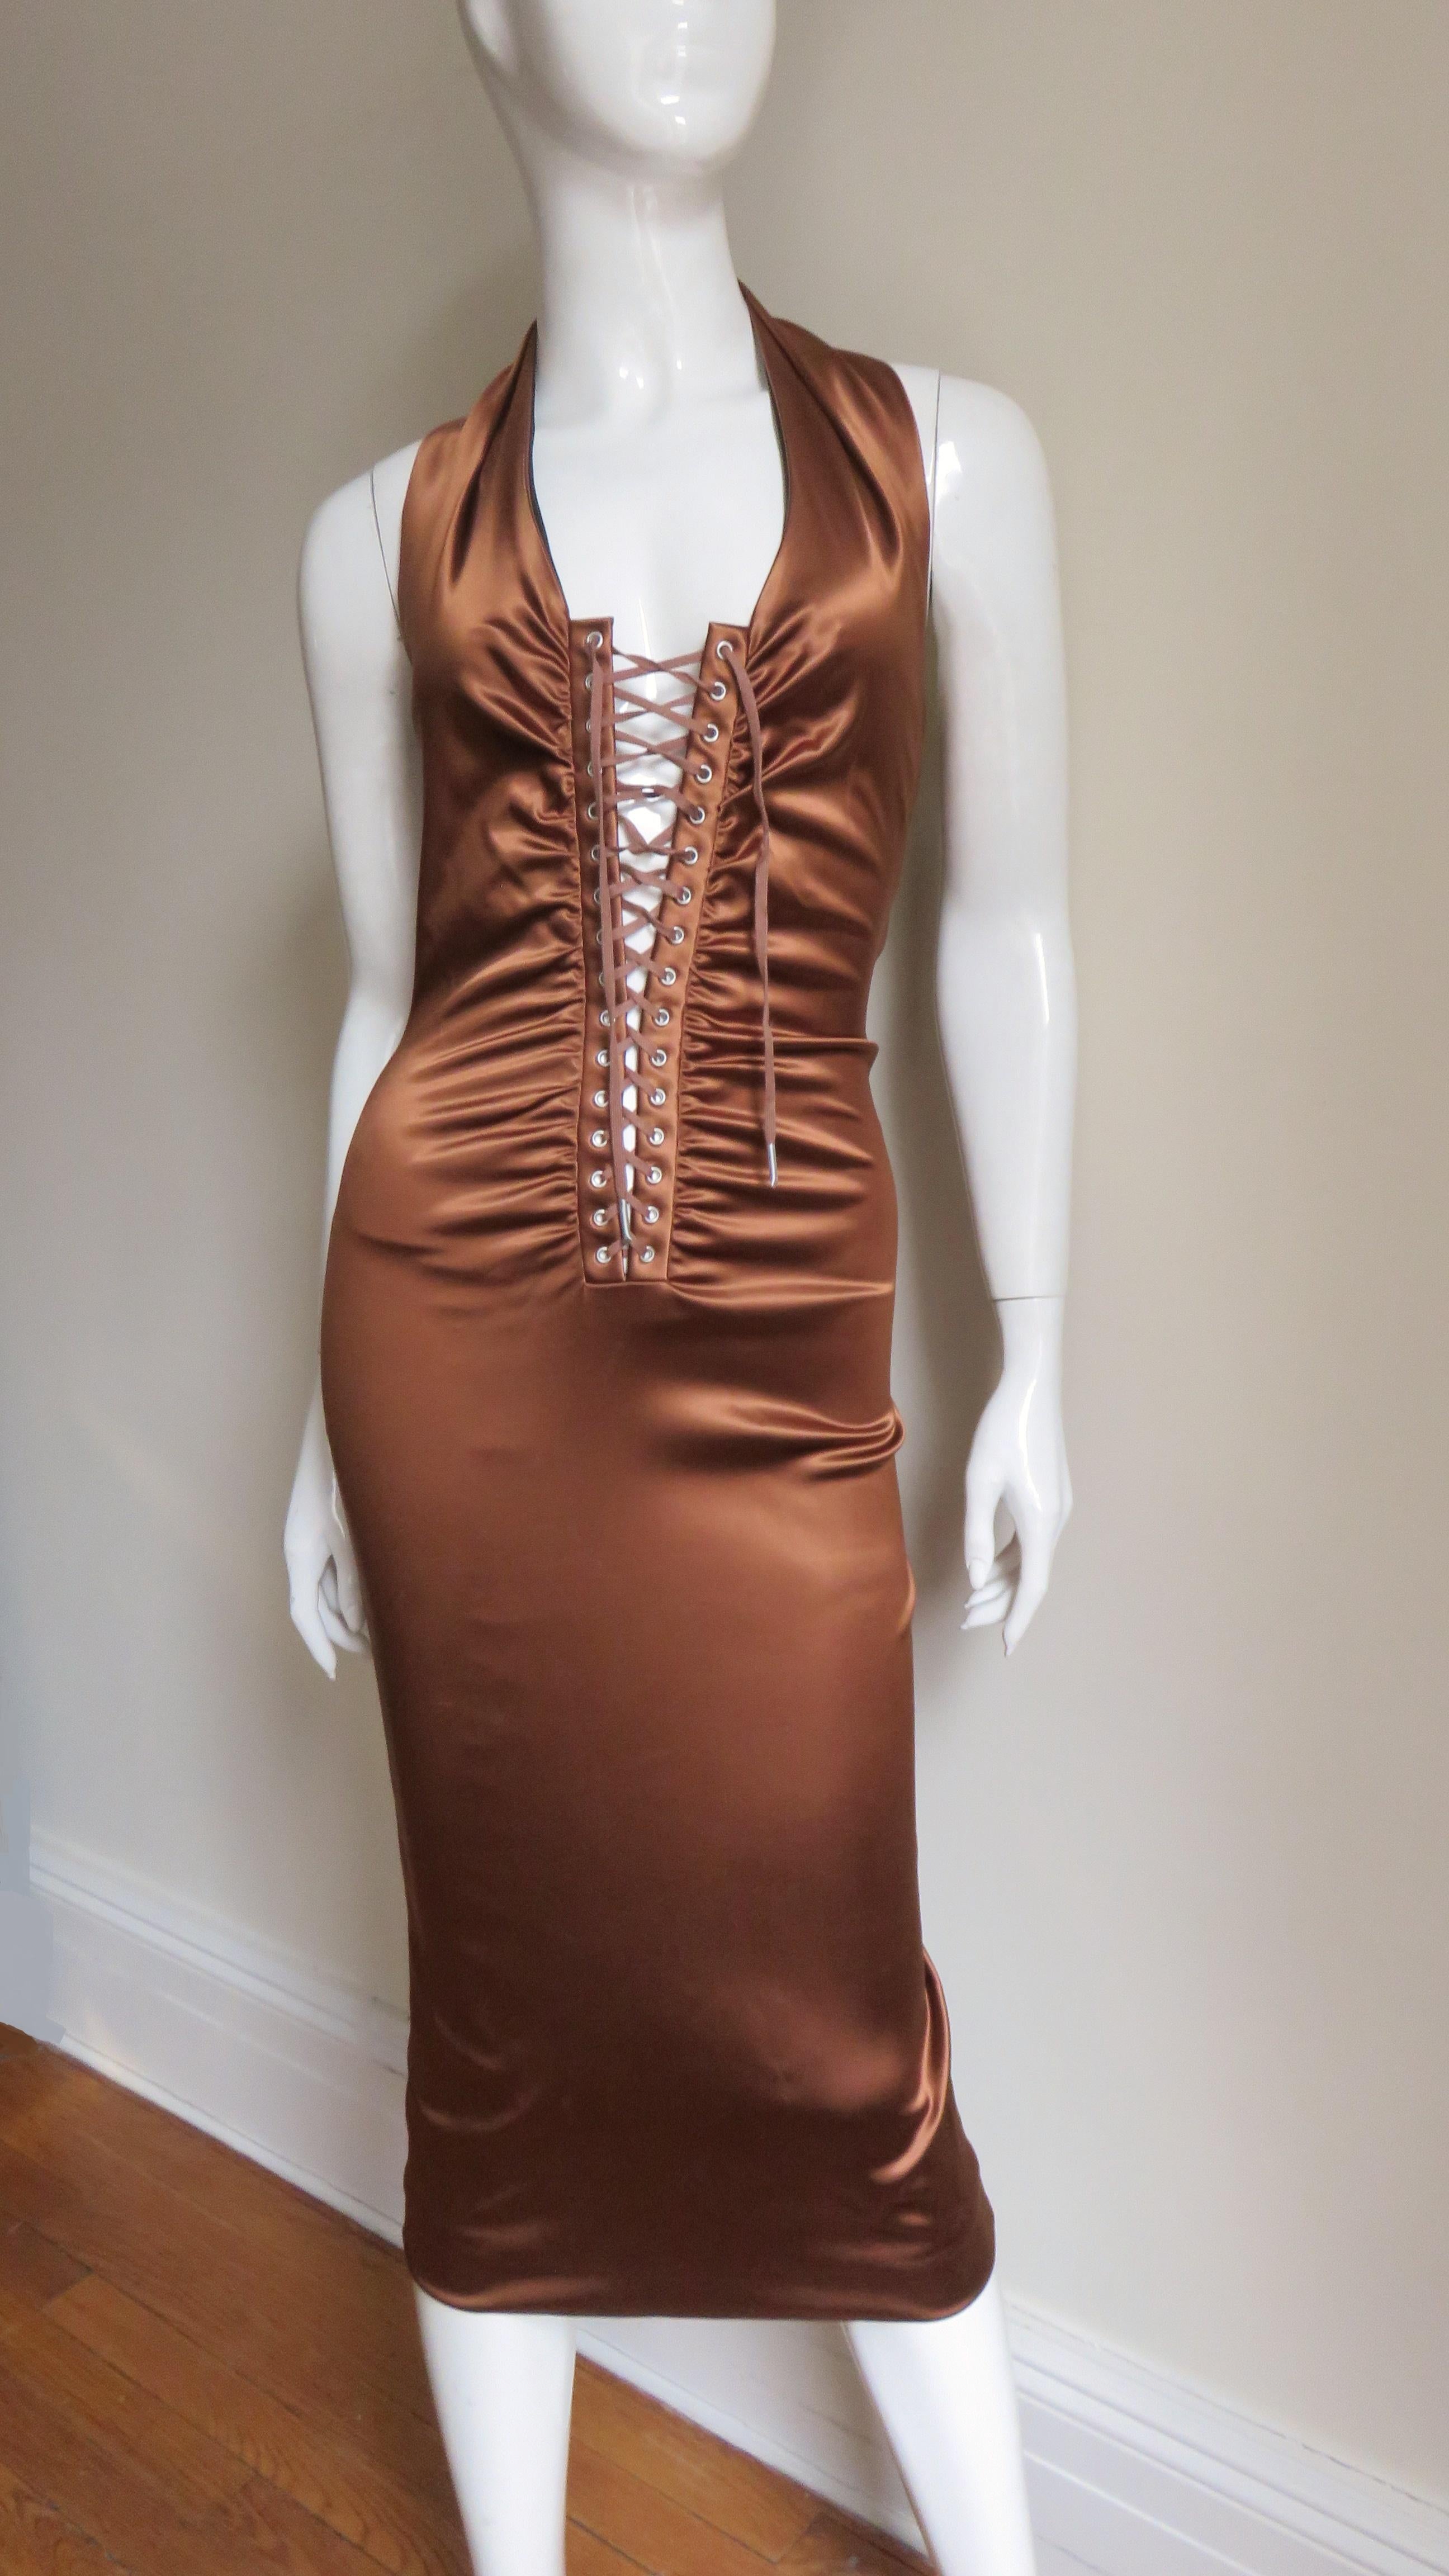 A fabulous rich bronze tan brown stretch silk halter dress from Dolce & Gabbana.  It has a scoop halter neckline with center front adjustable, lacing and subtle horizontal ruching front and back from bust through to the hips.  The dress has a